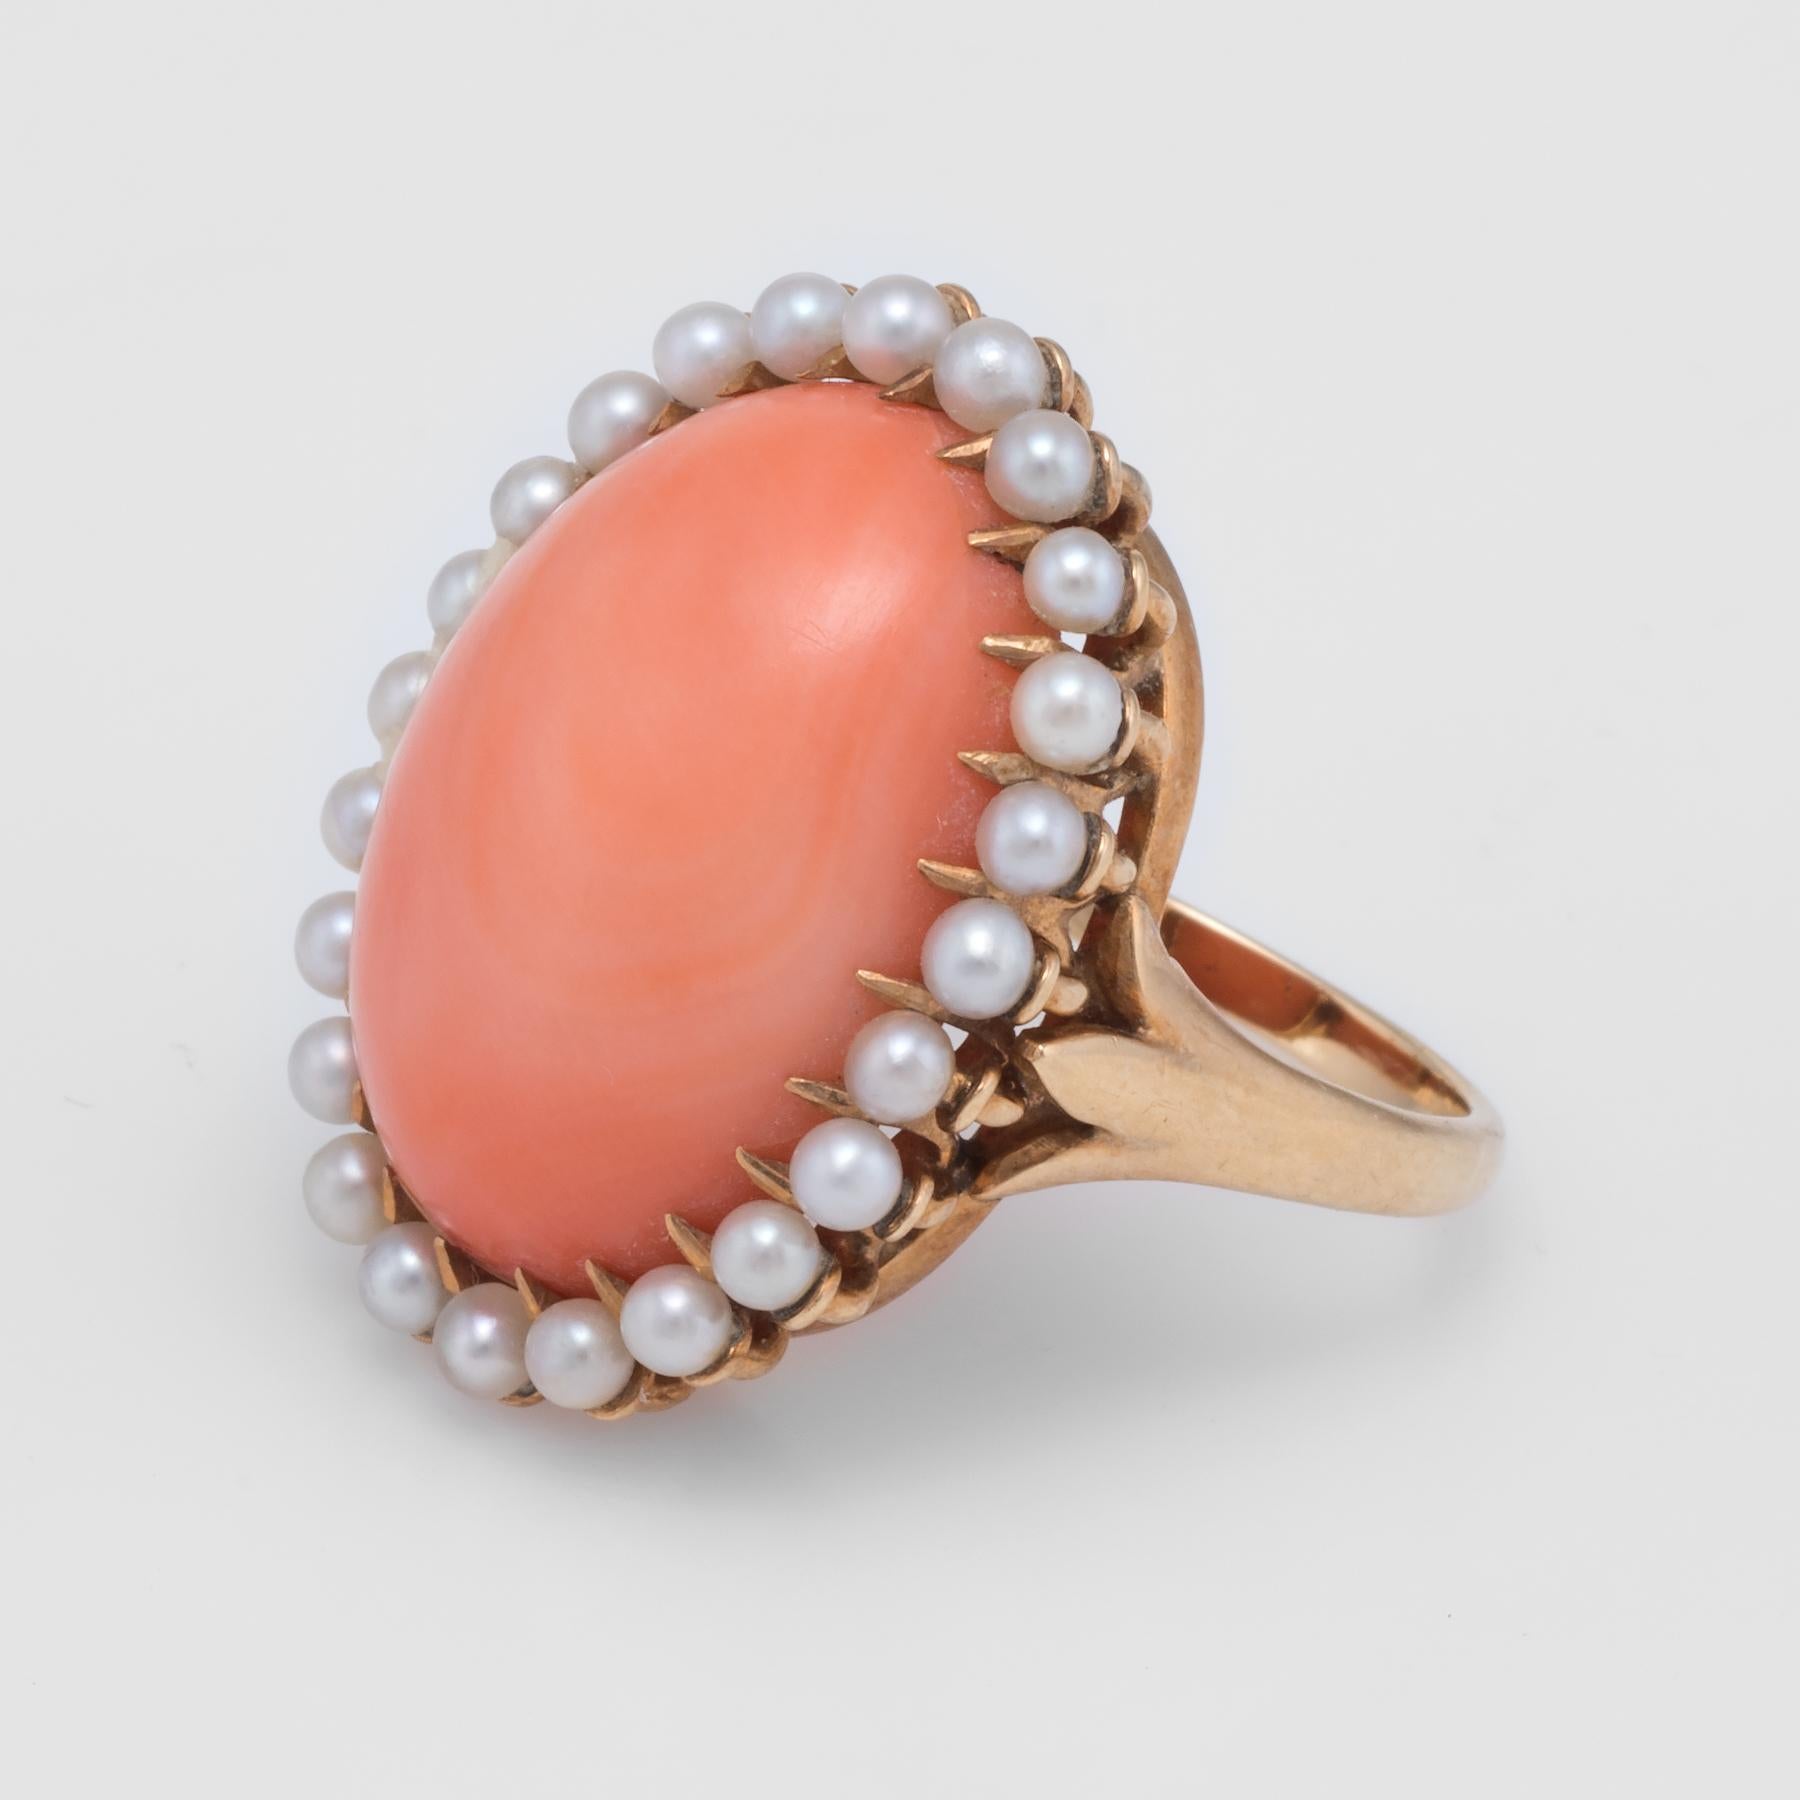 Oval Cut Natural Coral Pearl Cocktail Ring Vintage 14 Karat Gold Estate Fine Jewelry